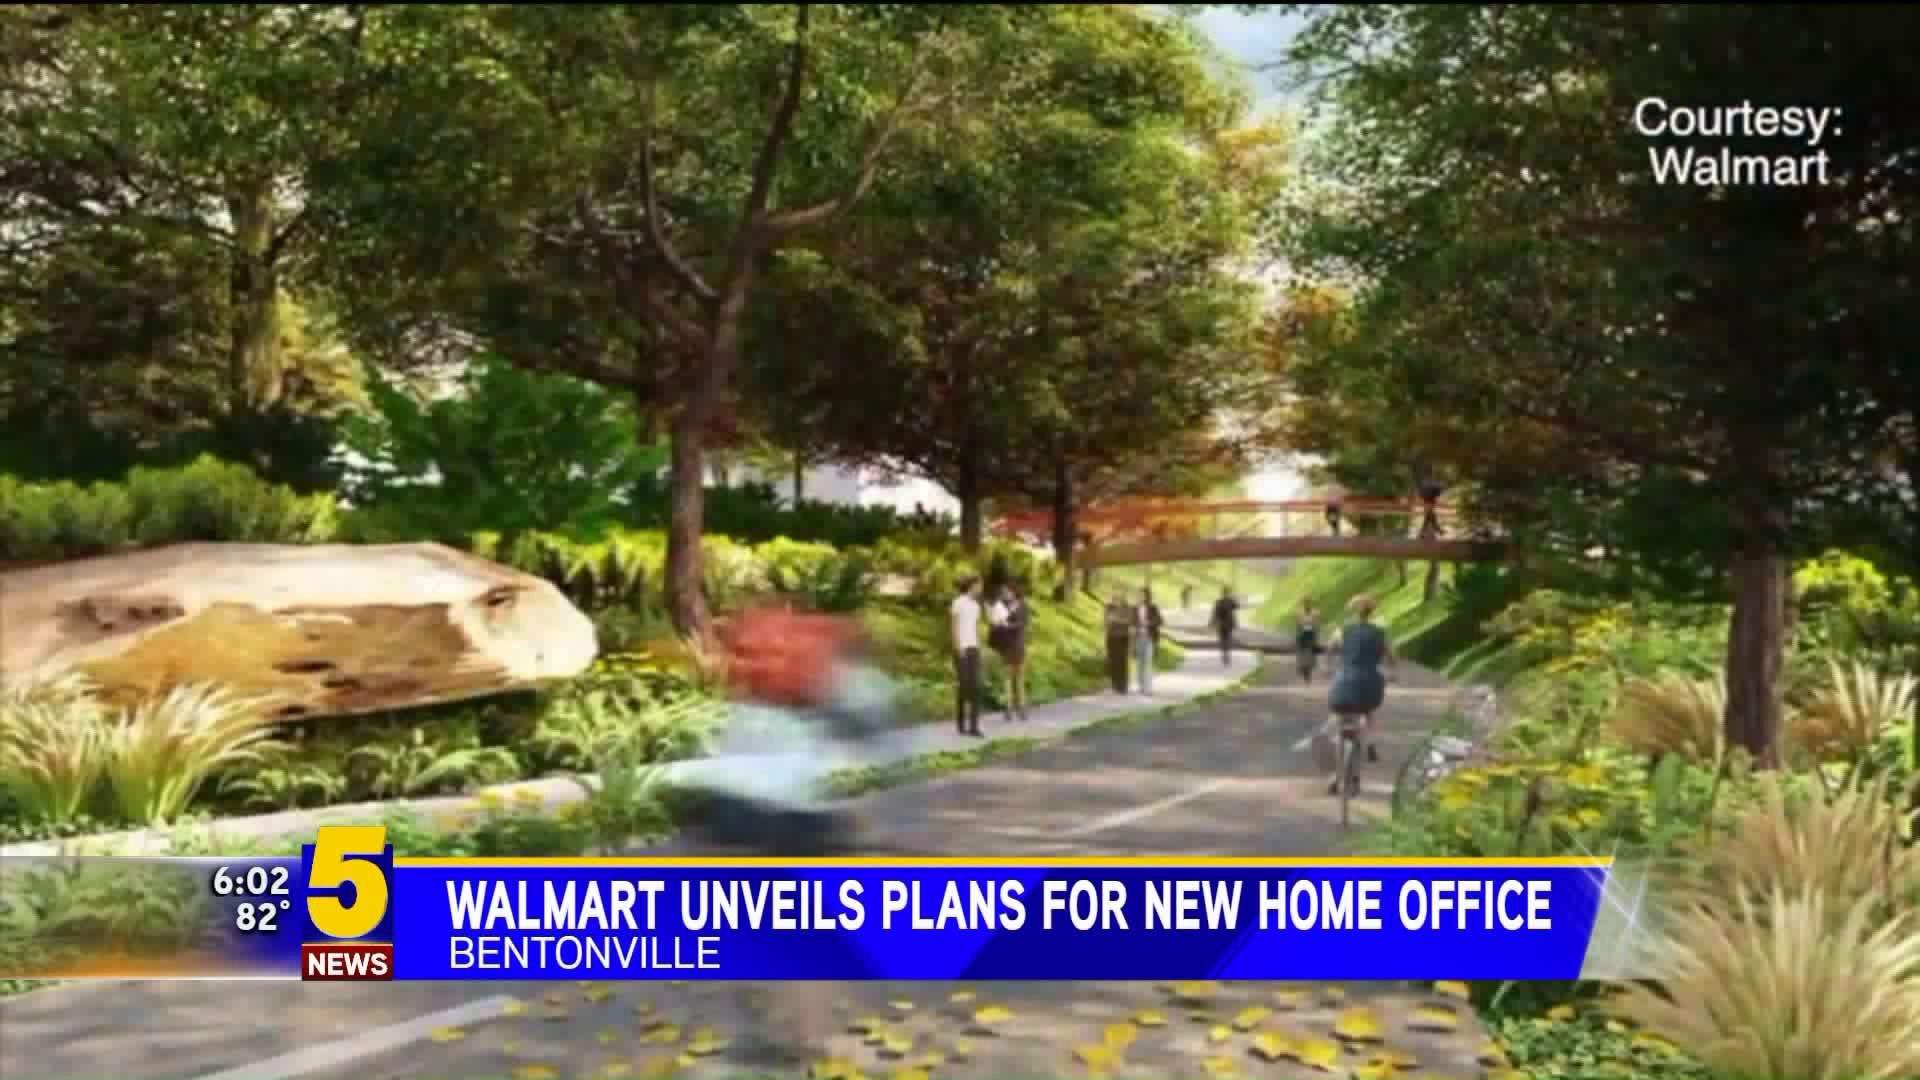 Walmart Unveils Plans for New Home Office